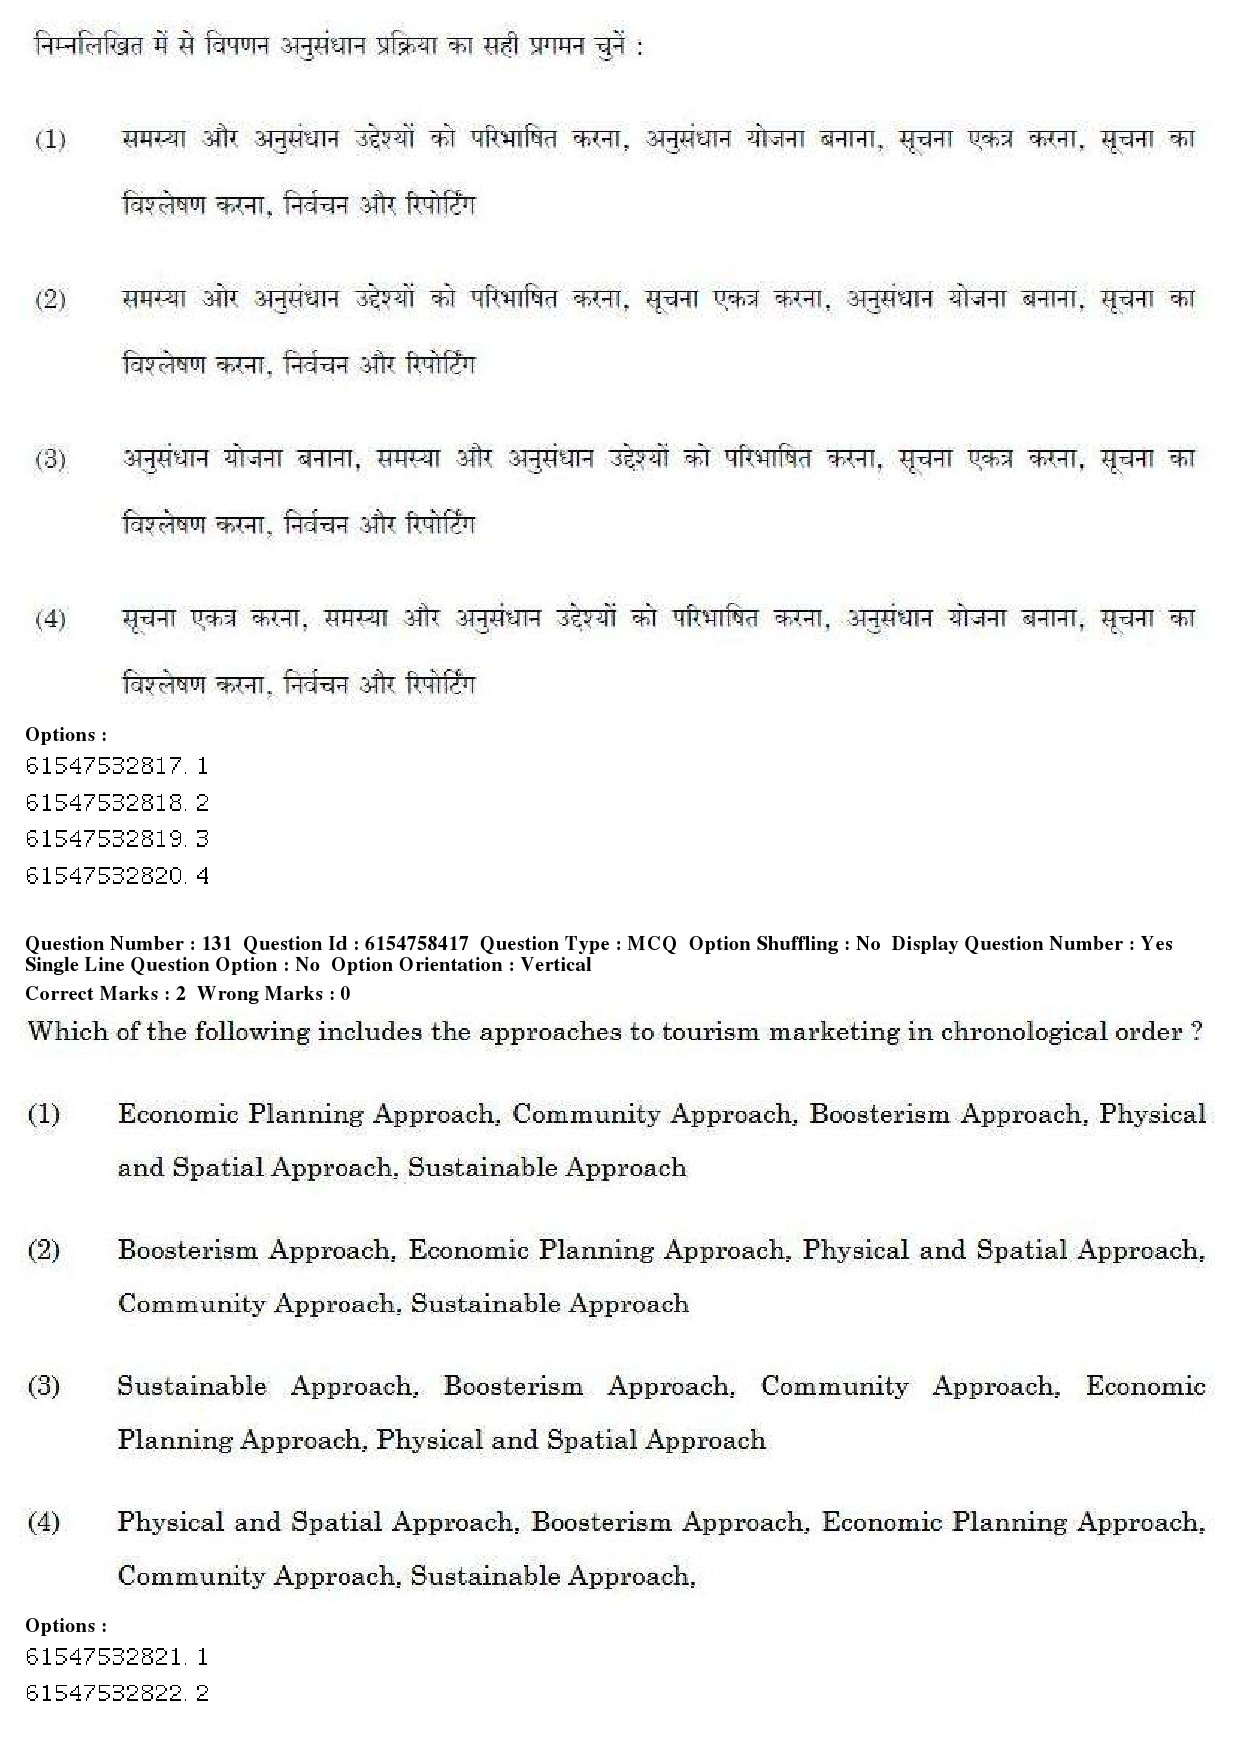 UGC NET Tourism Administration And Management Question Paper December 2019 146